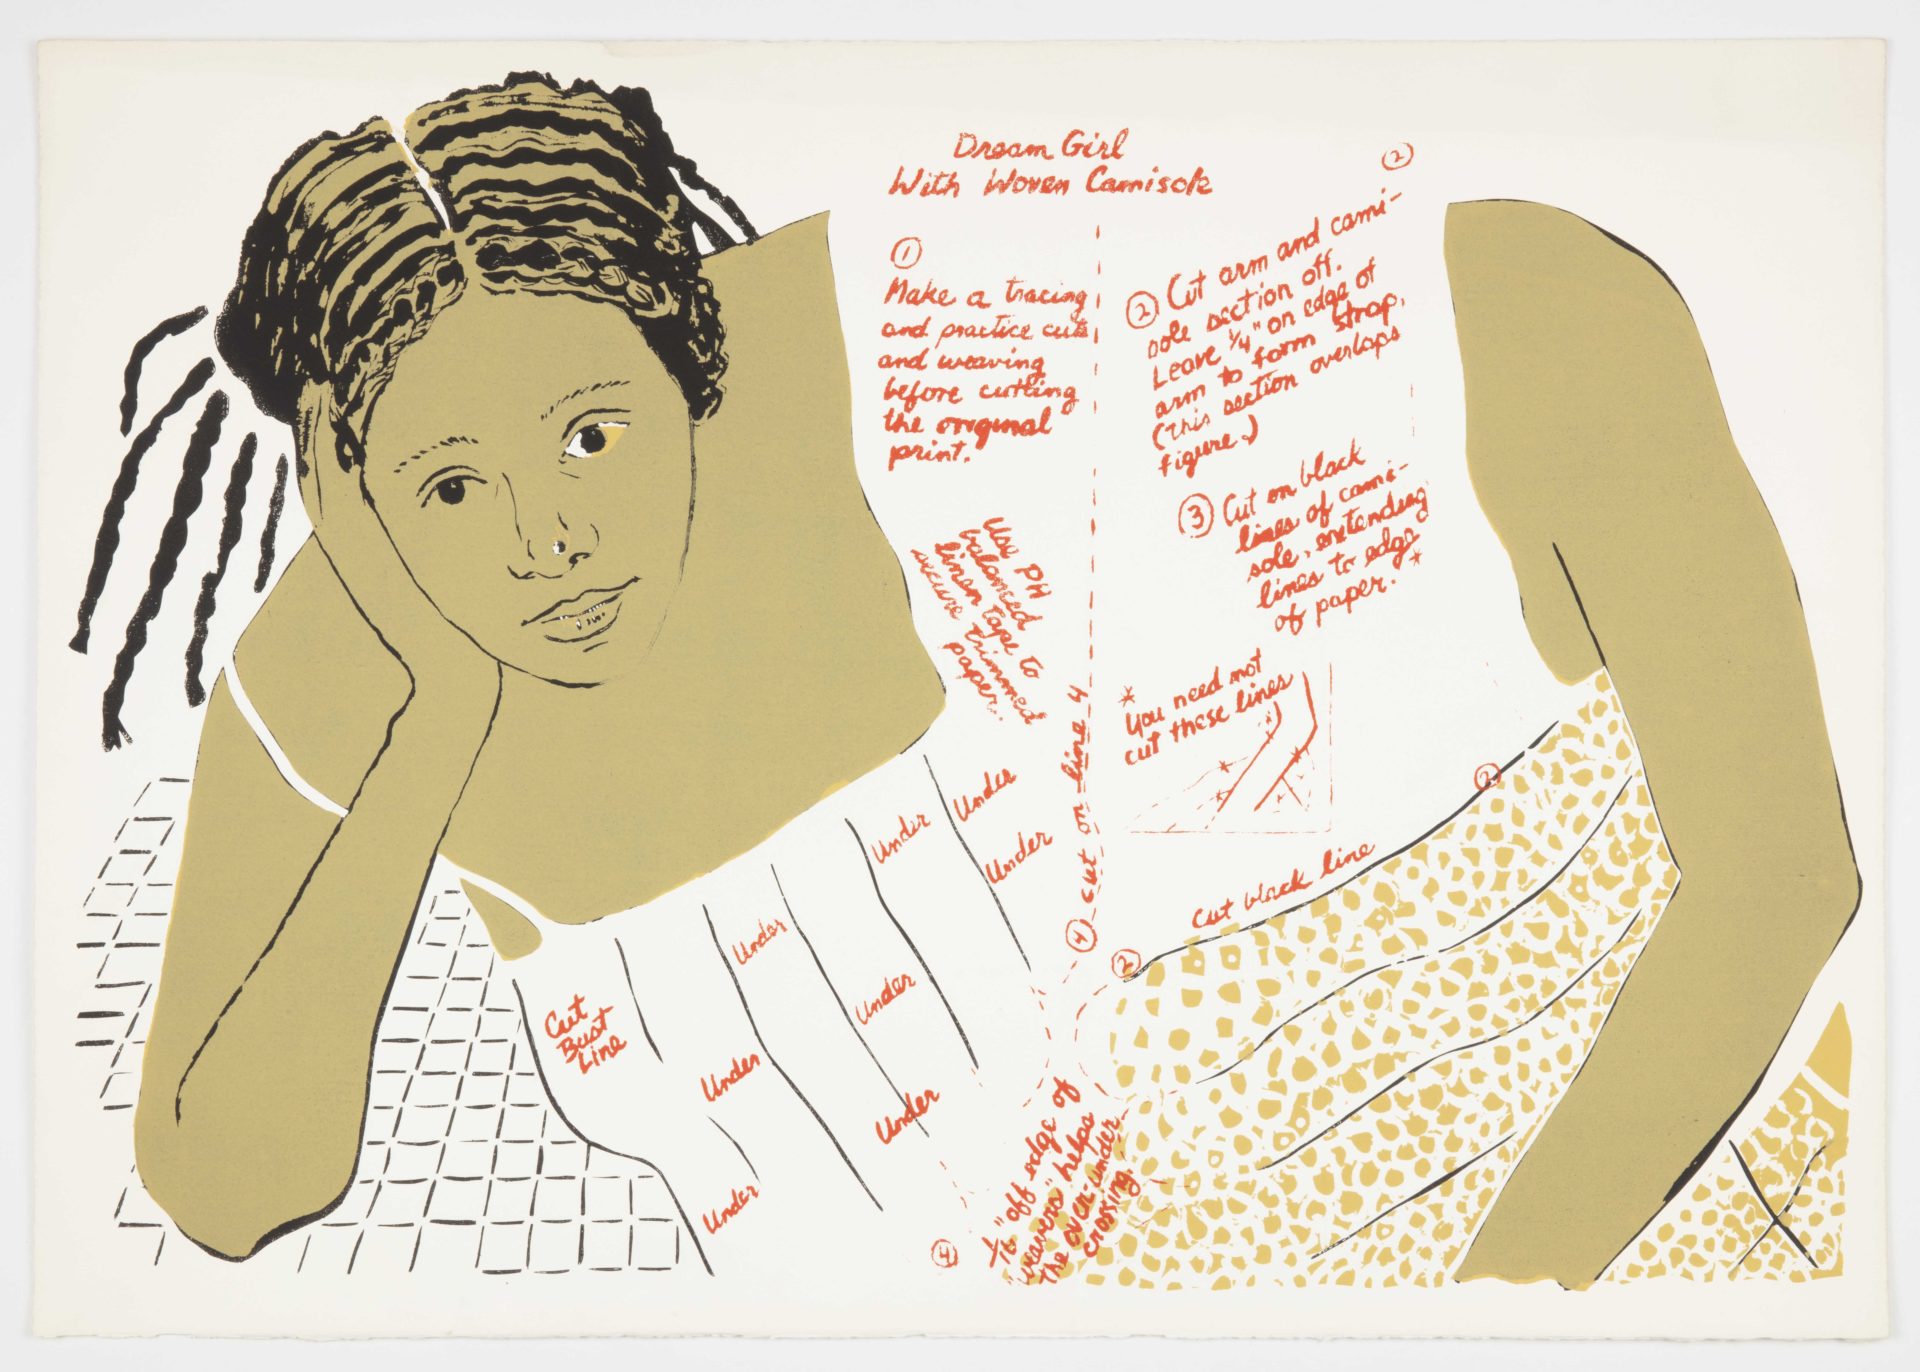 Dream Girl with Woven Camisole, 1978, Etching and silkscreen, 19 7/8 x 28 inches (50.5 x 71.1 cm), Edition of 7